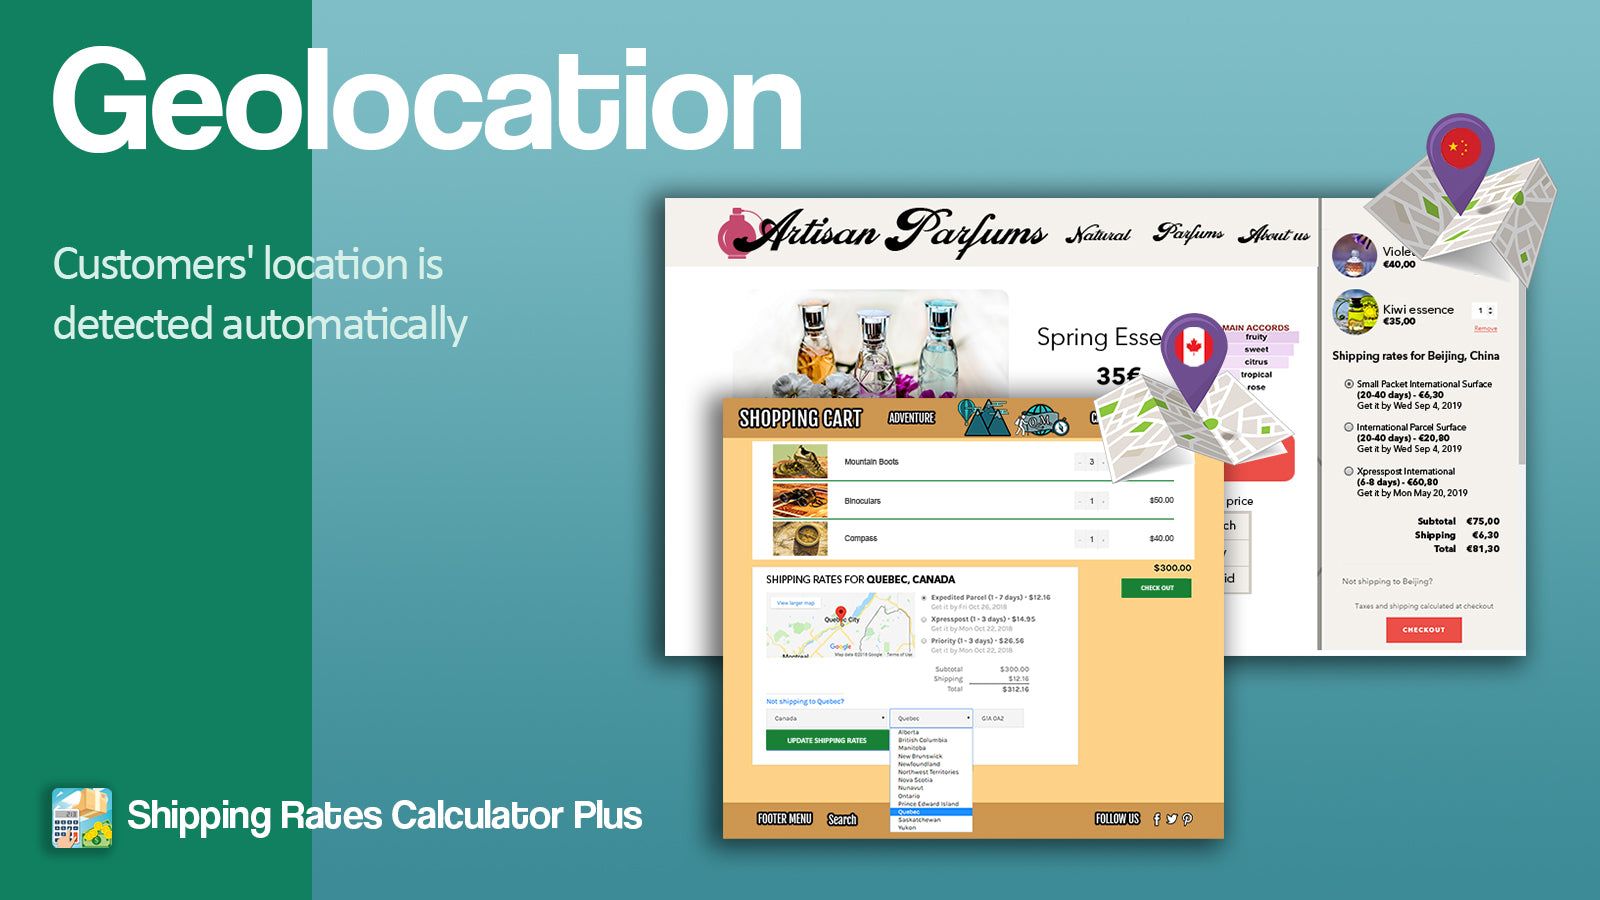 Automatic geolocation detection acc to customers' location.